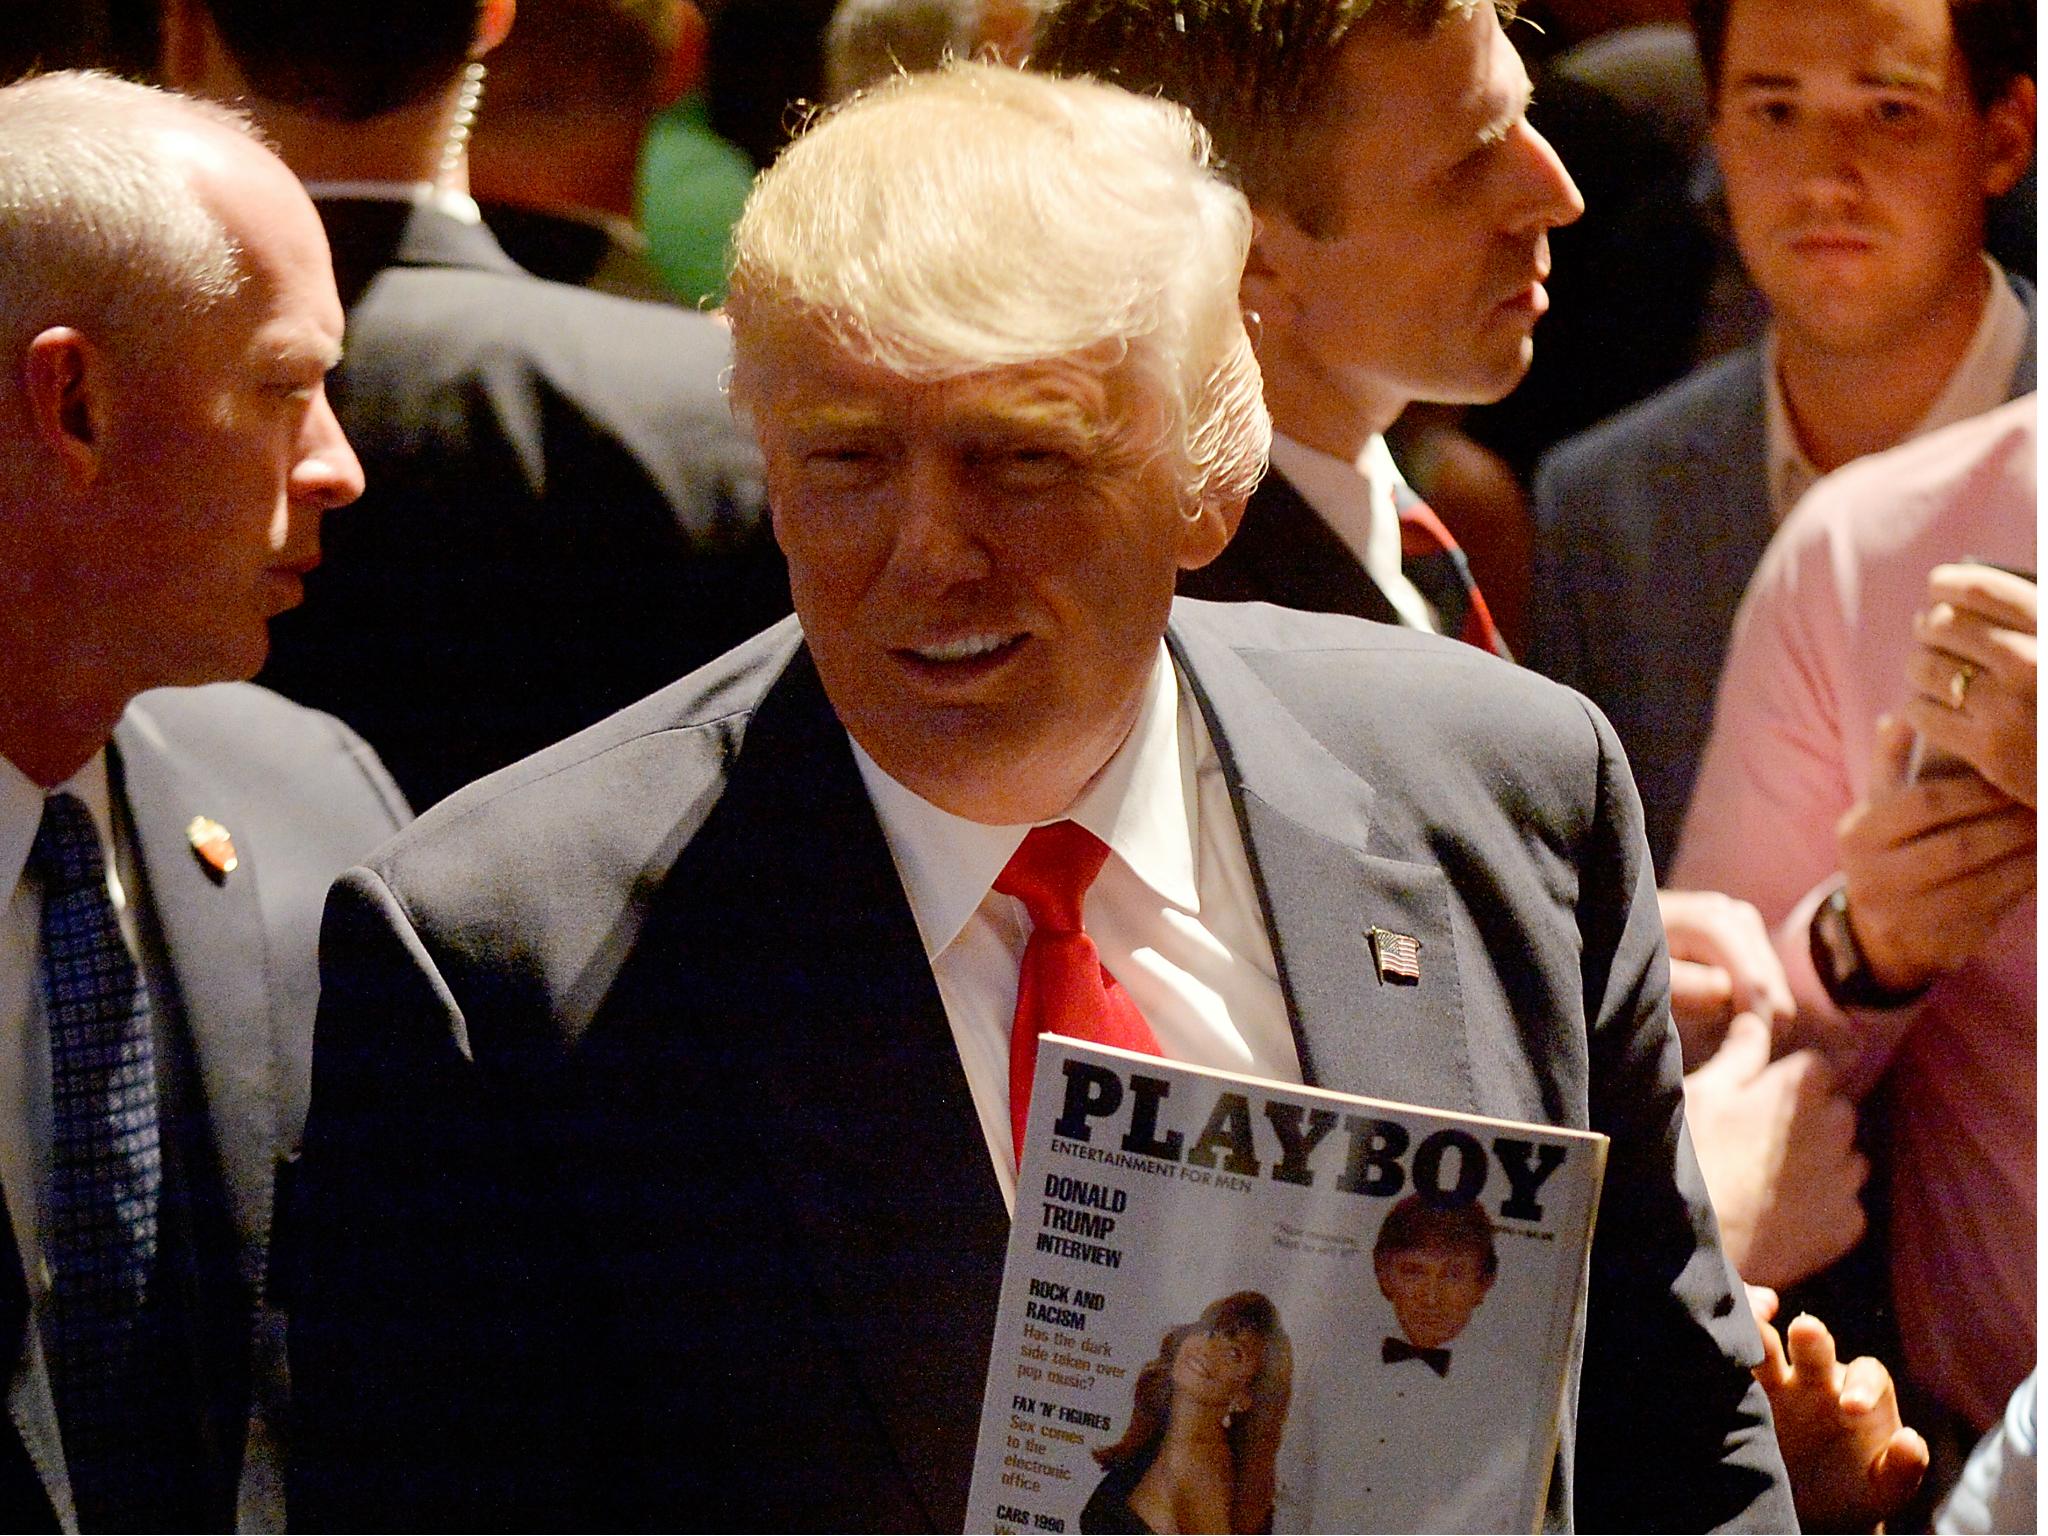 Donald Trump holding a copy of his Playboy cover from March 1990 on the campaign trail in North Carolina on 5 July 2016.